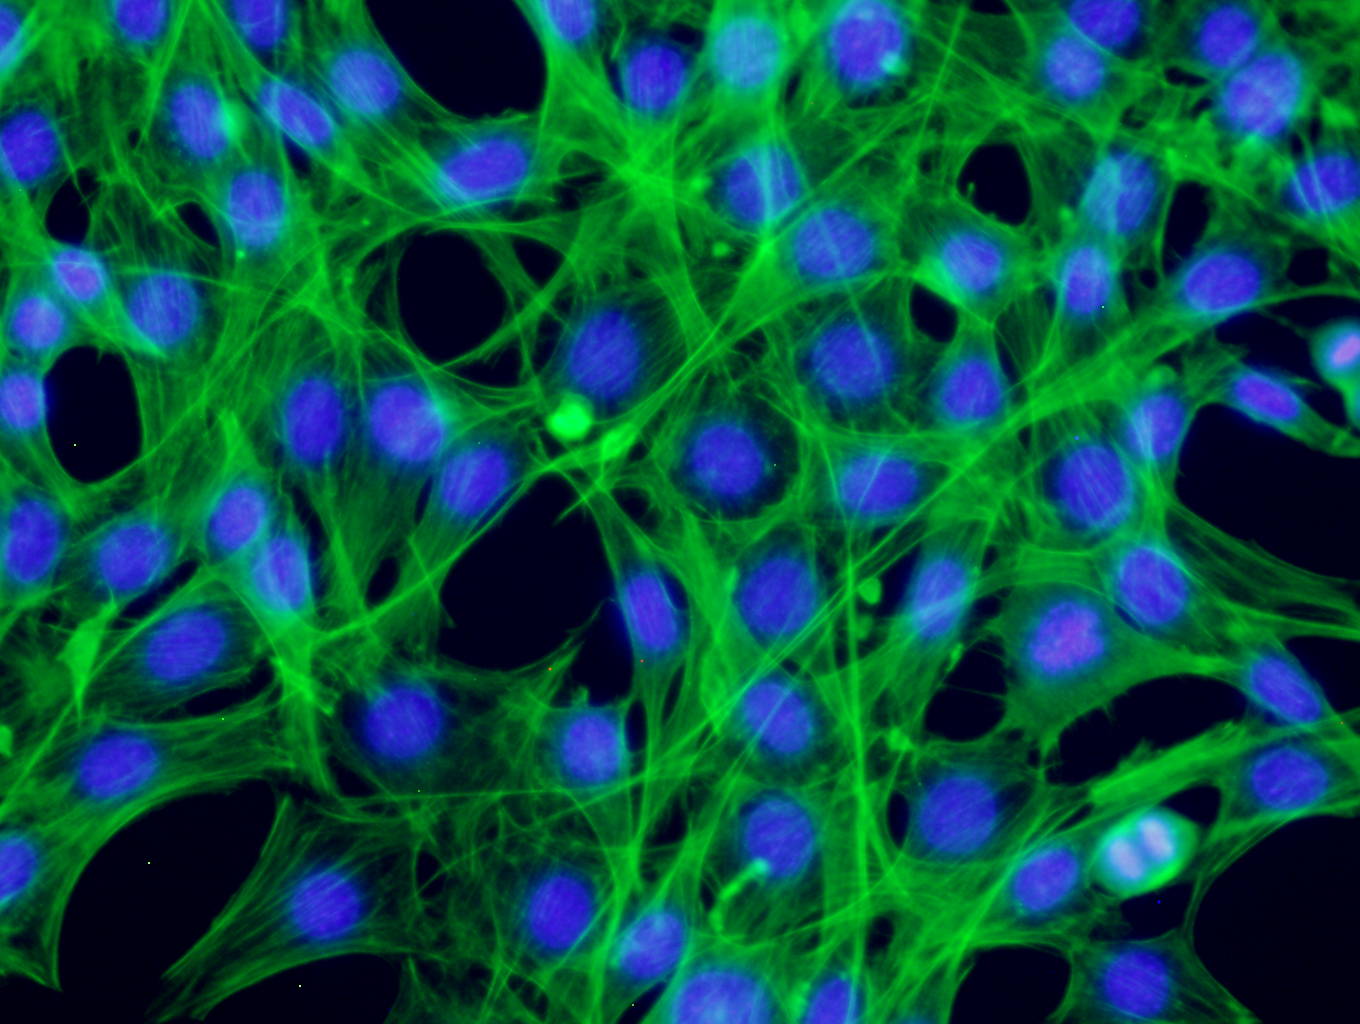 Fluorescence microscopy image of mouse cells growing with recombinant human fgf2 fgf-basic Future Fields